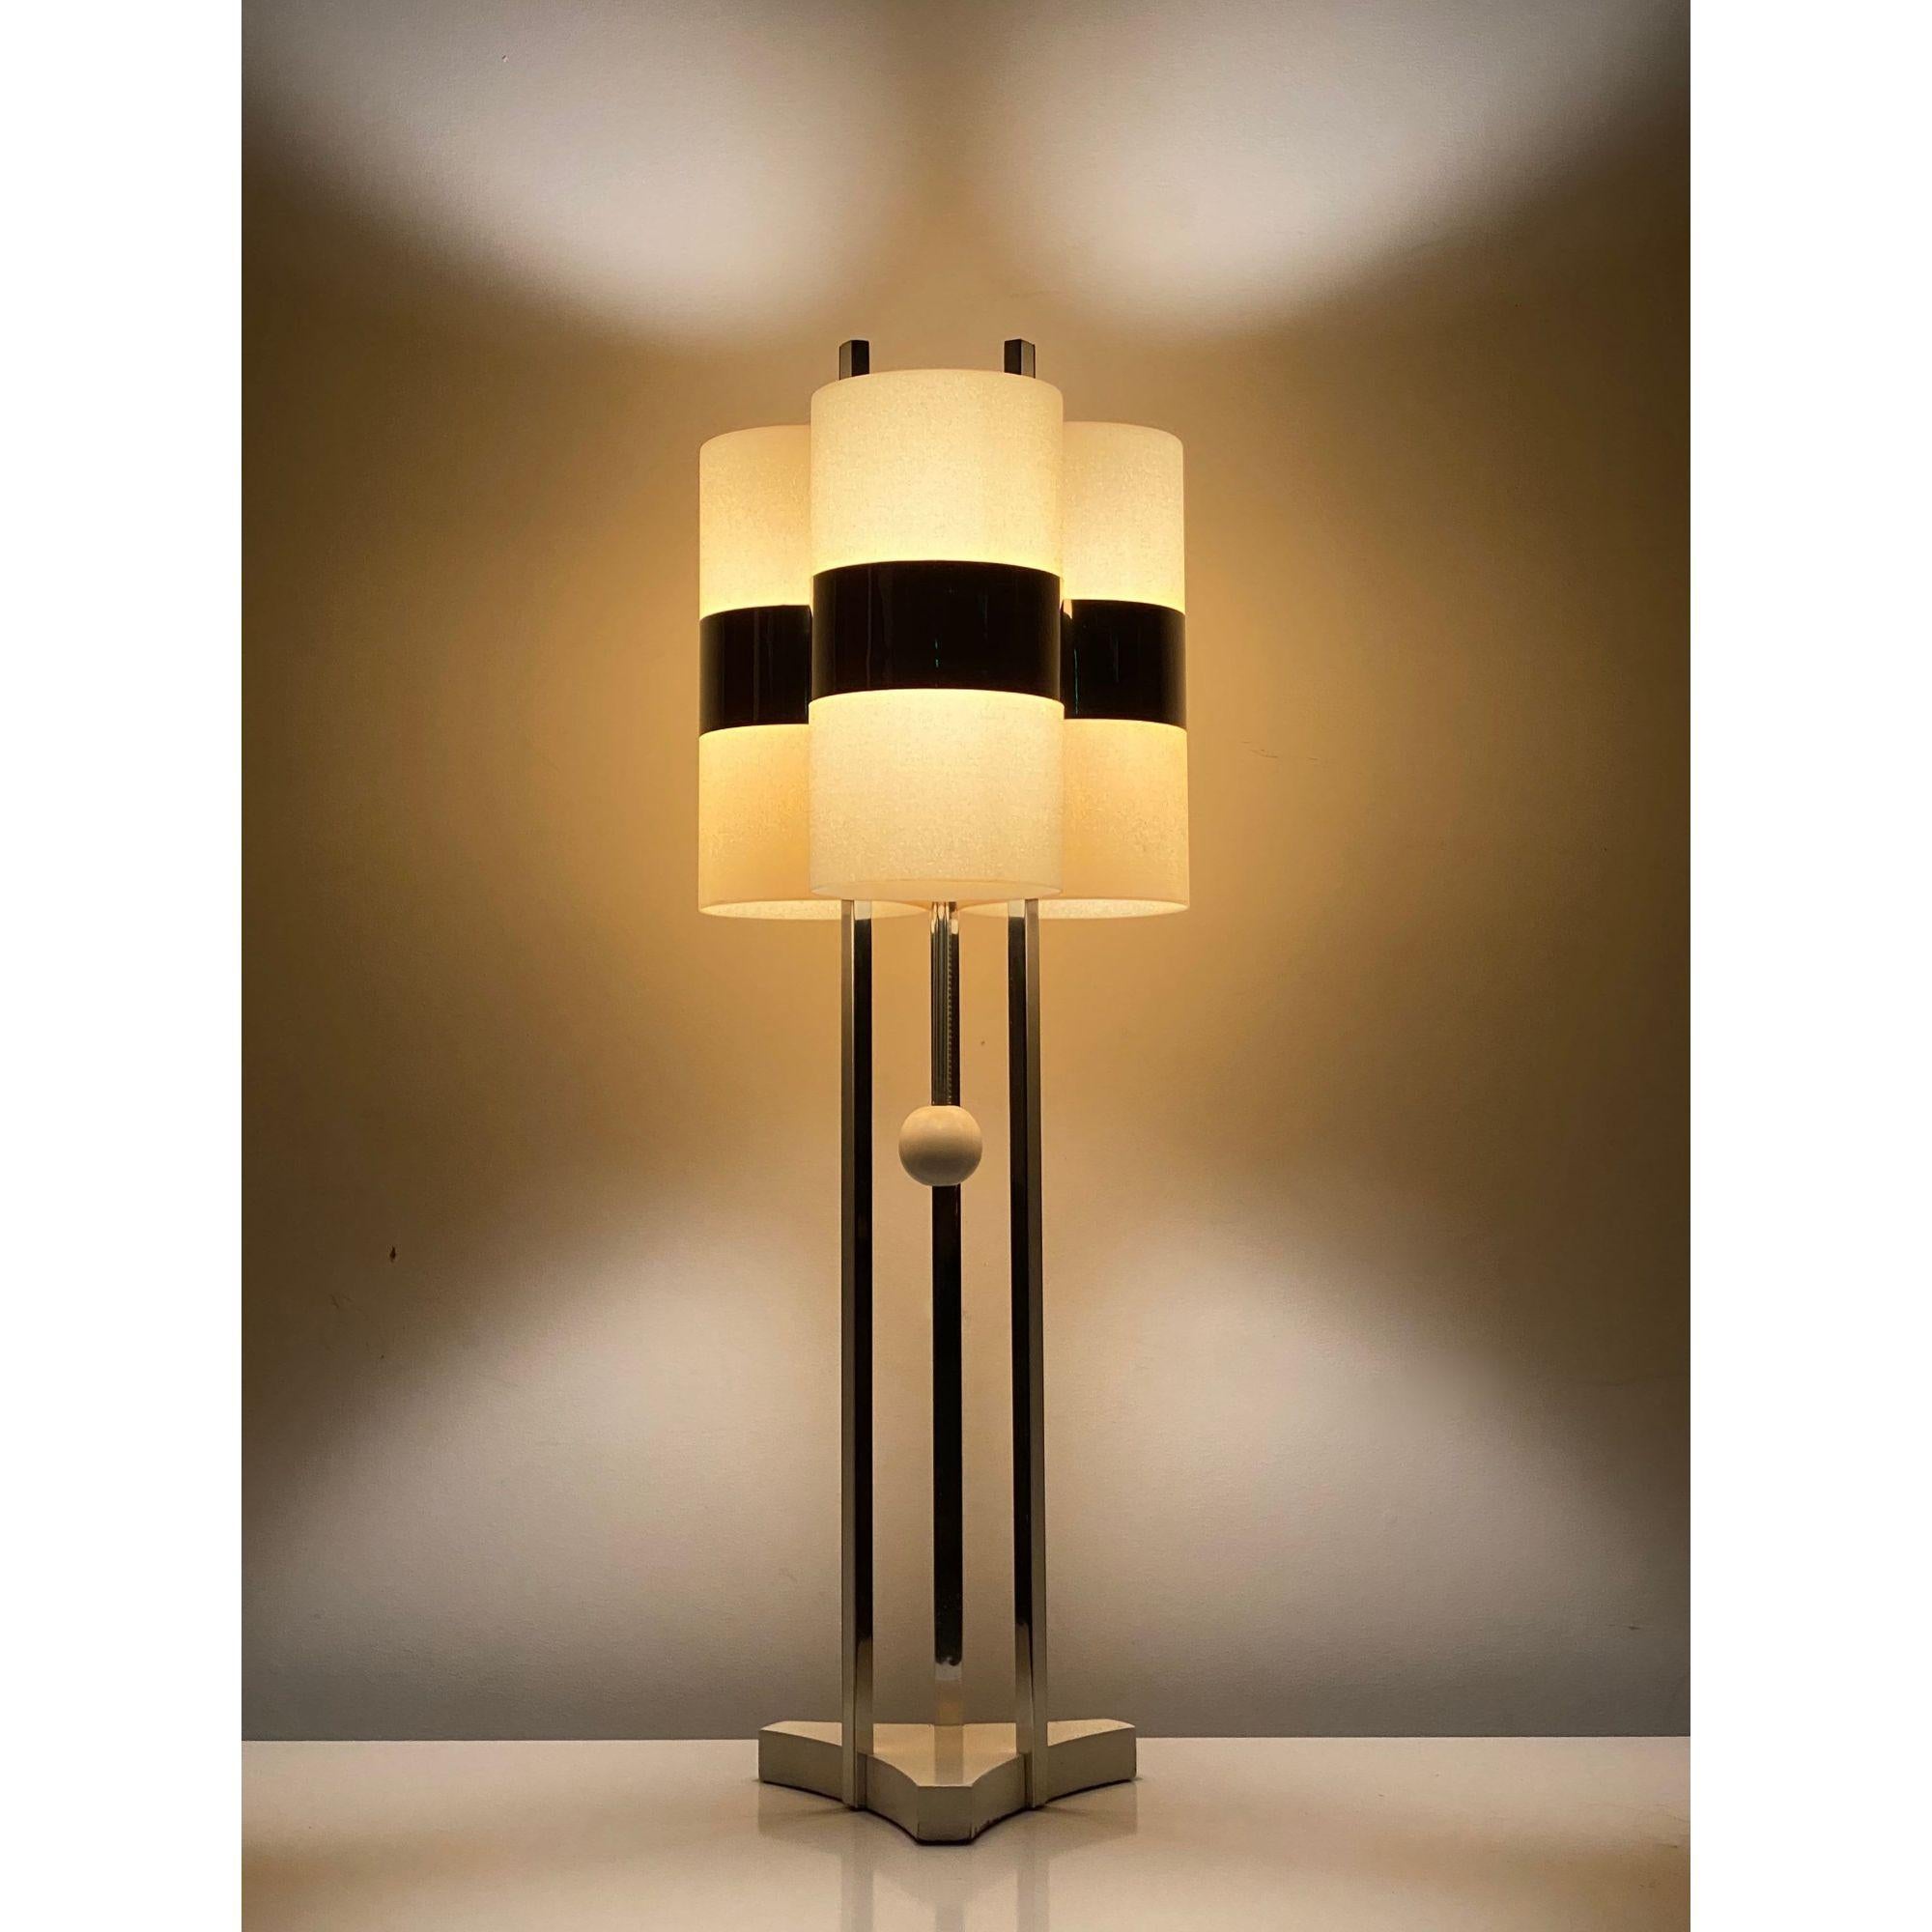 Space Age Rare Table Lamp in Chrome and Acrylic by Modeline, circa 1970s For Sale 5